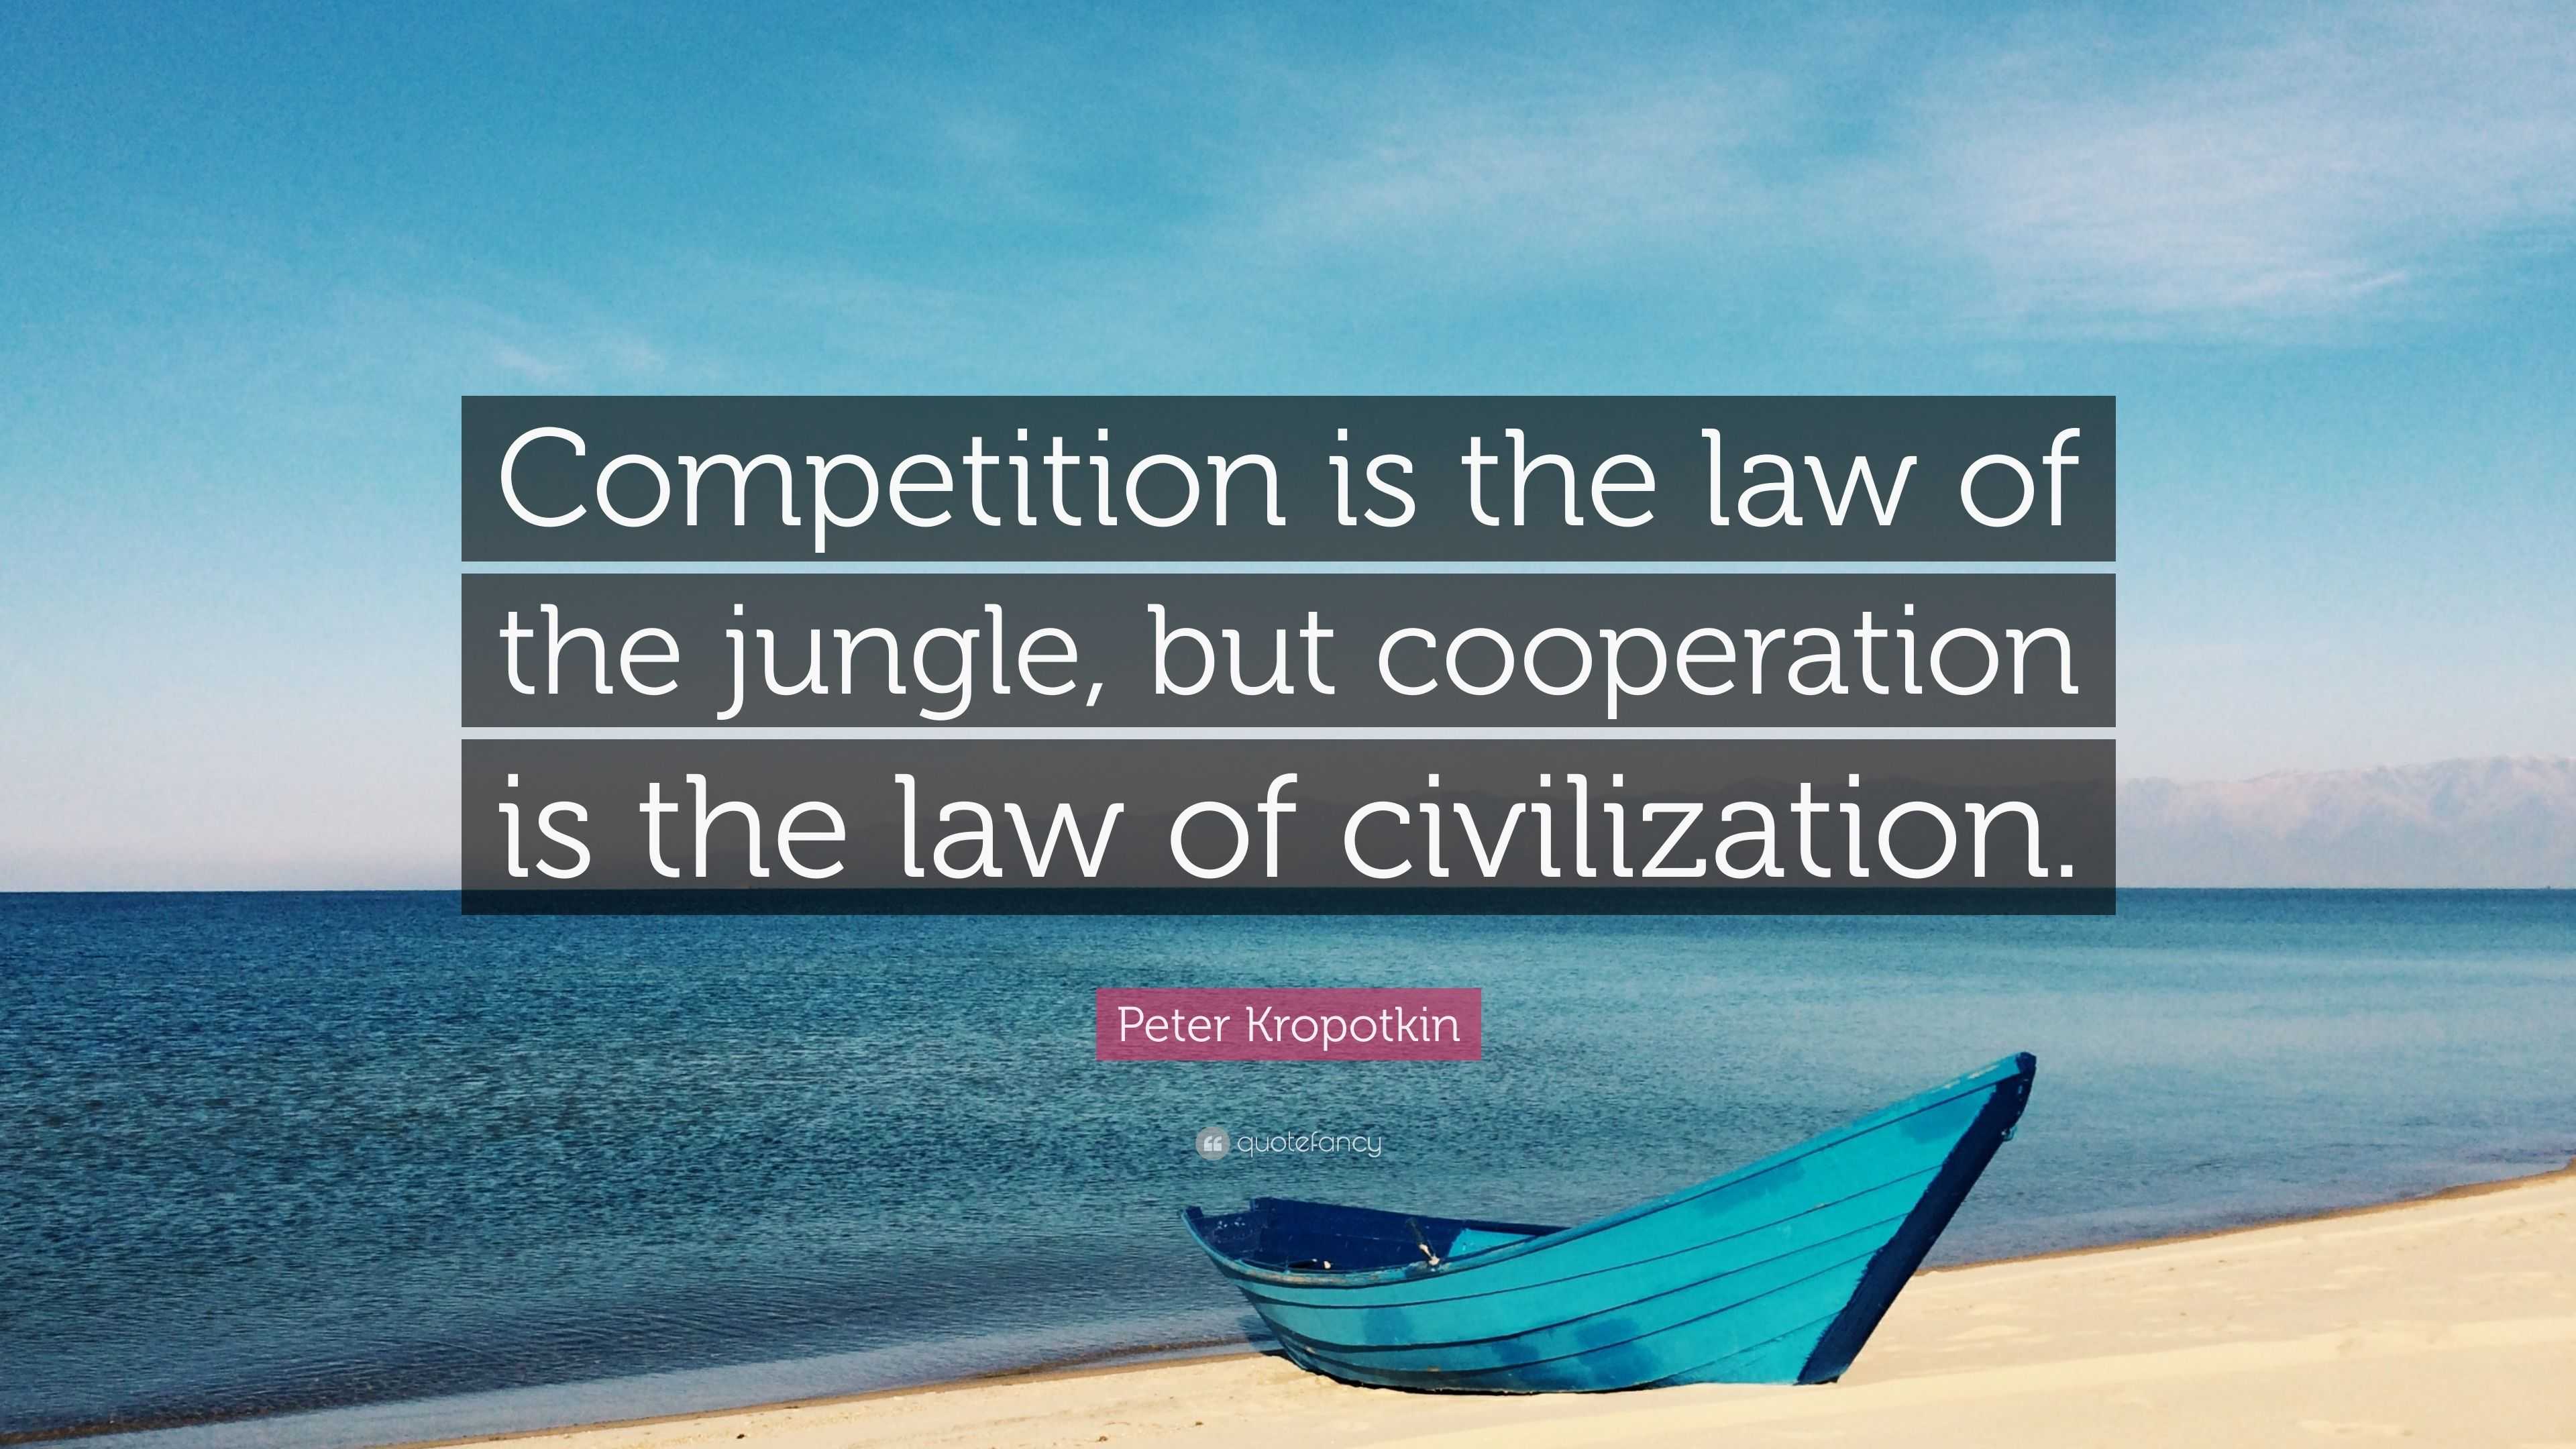 Peter Kropotkin Quote: “Competition is the law of the jungle, but